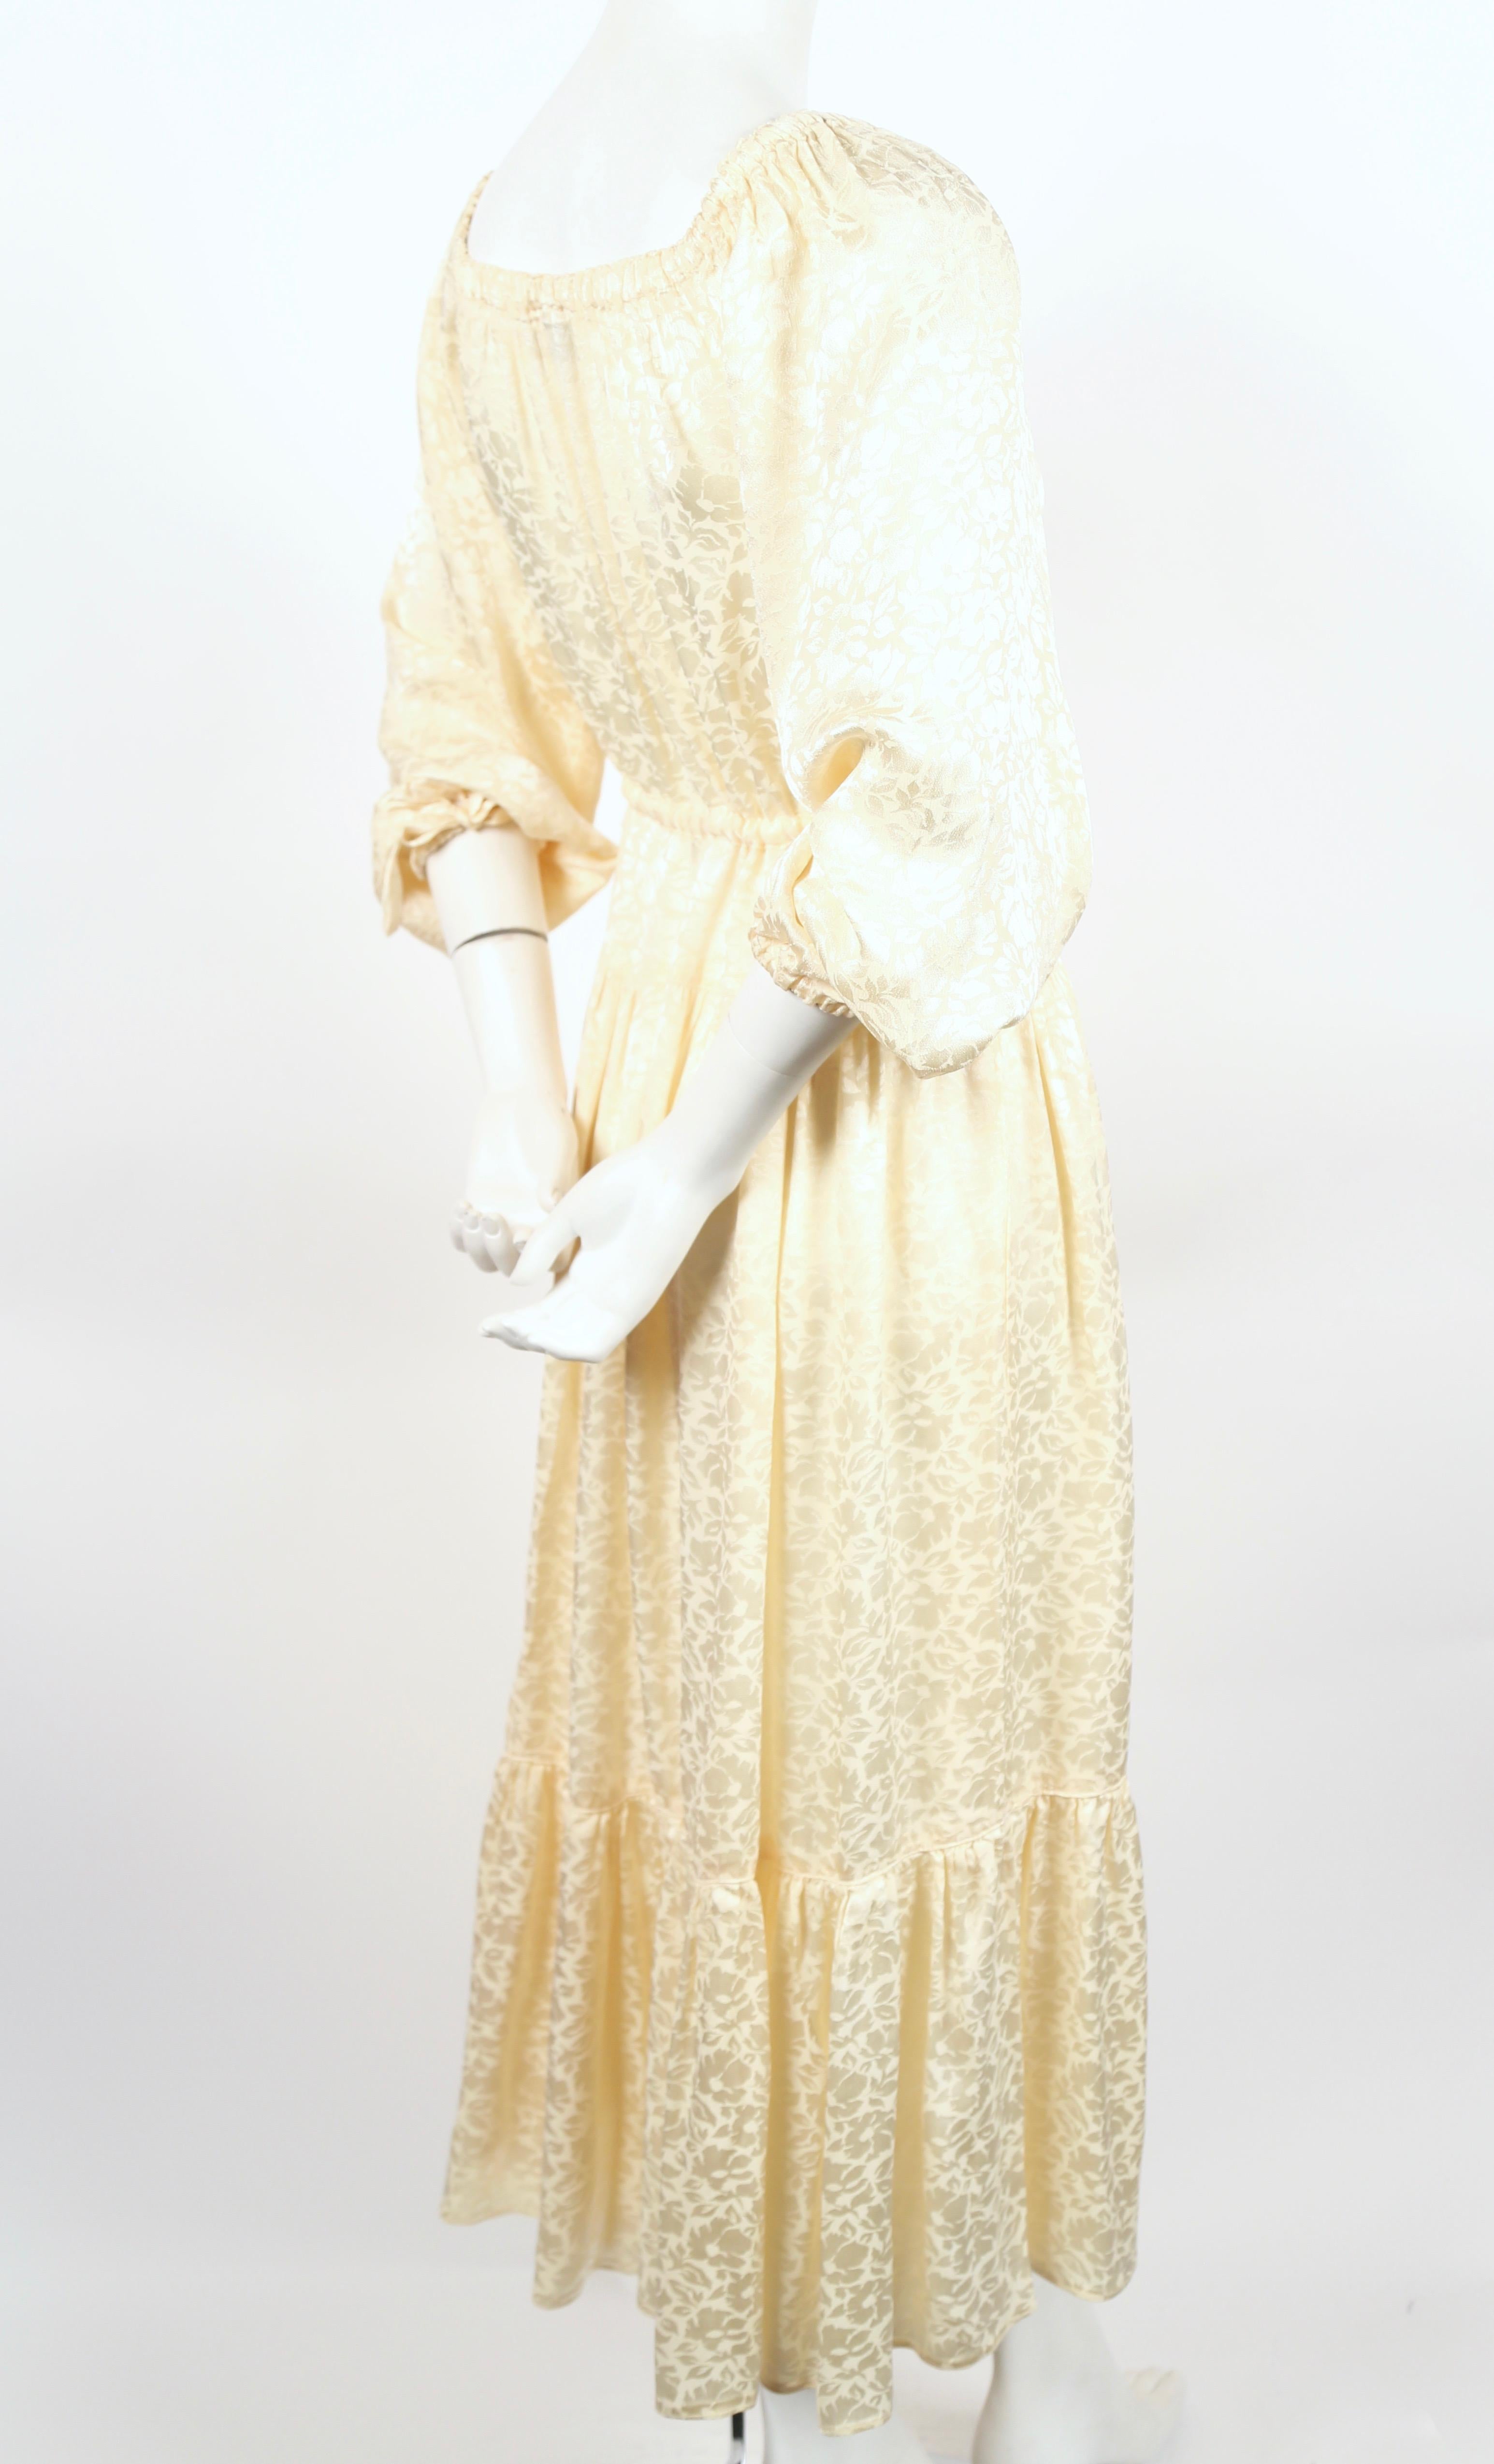 Cream, floral jacquard dress designed by Ossie Clark for Radley dating to the 1970's. Dress would work as a great alternative for a traditional wedding dress.  Dress has an elasticized neckline so it can be worn off the shoulder and has a drawstring